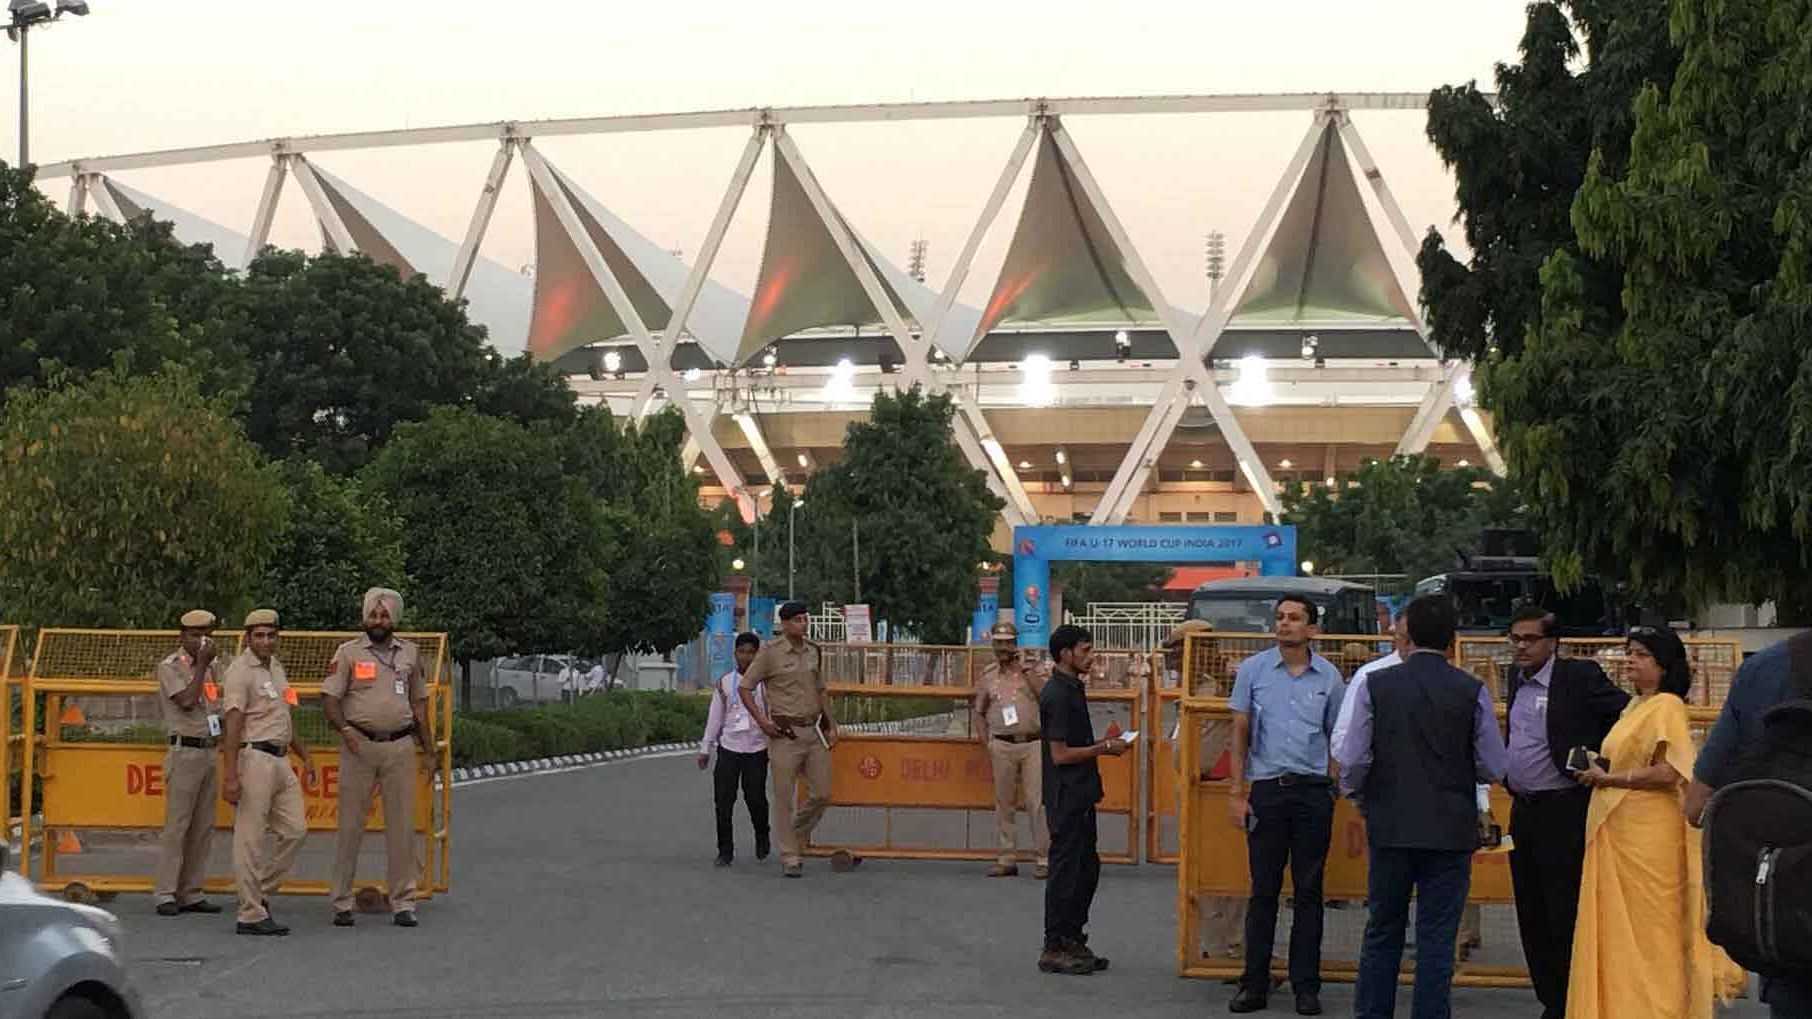 New Delhi’s Jawaharlal Nehru Stadium will be used as a quarantine facility to house patients infected by coronavirus.